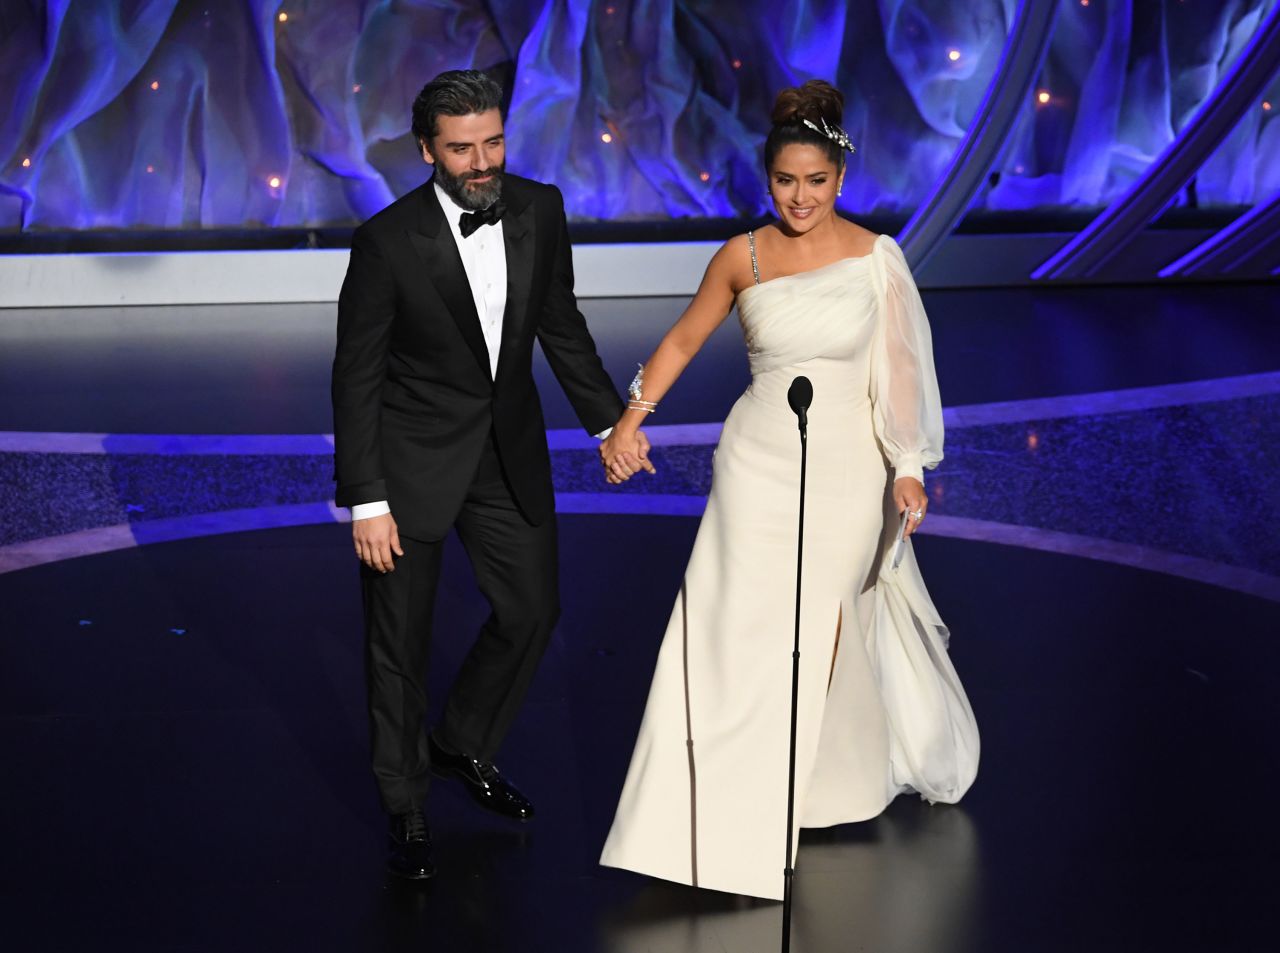 Oscar Isaac and Salma Hayek present awards during the show. Hayek joked that she was finally on stage with an Oscar.